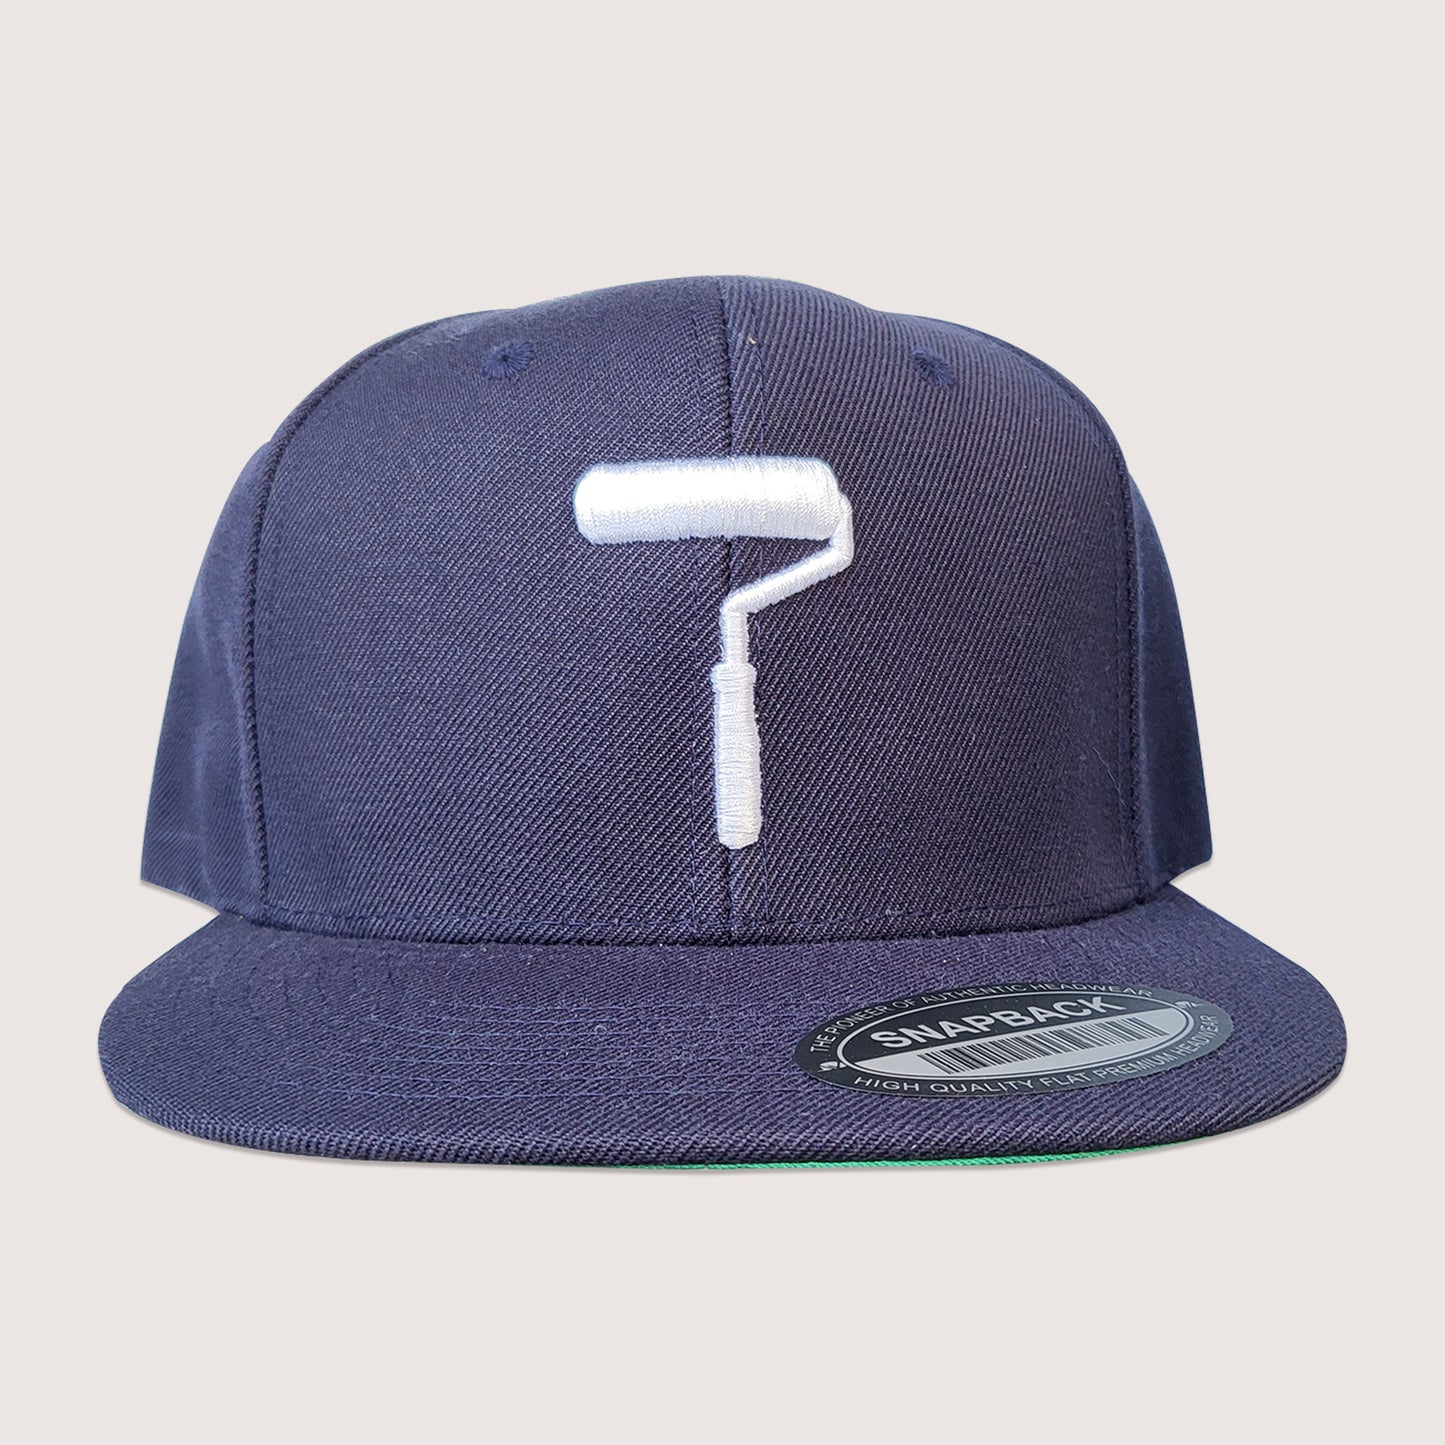 Phatcaps brand baseball cap in navy blue with white embroidery